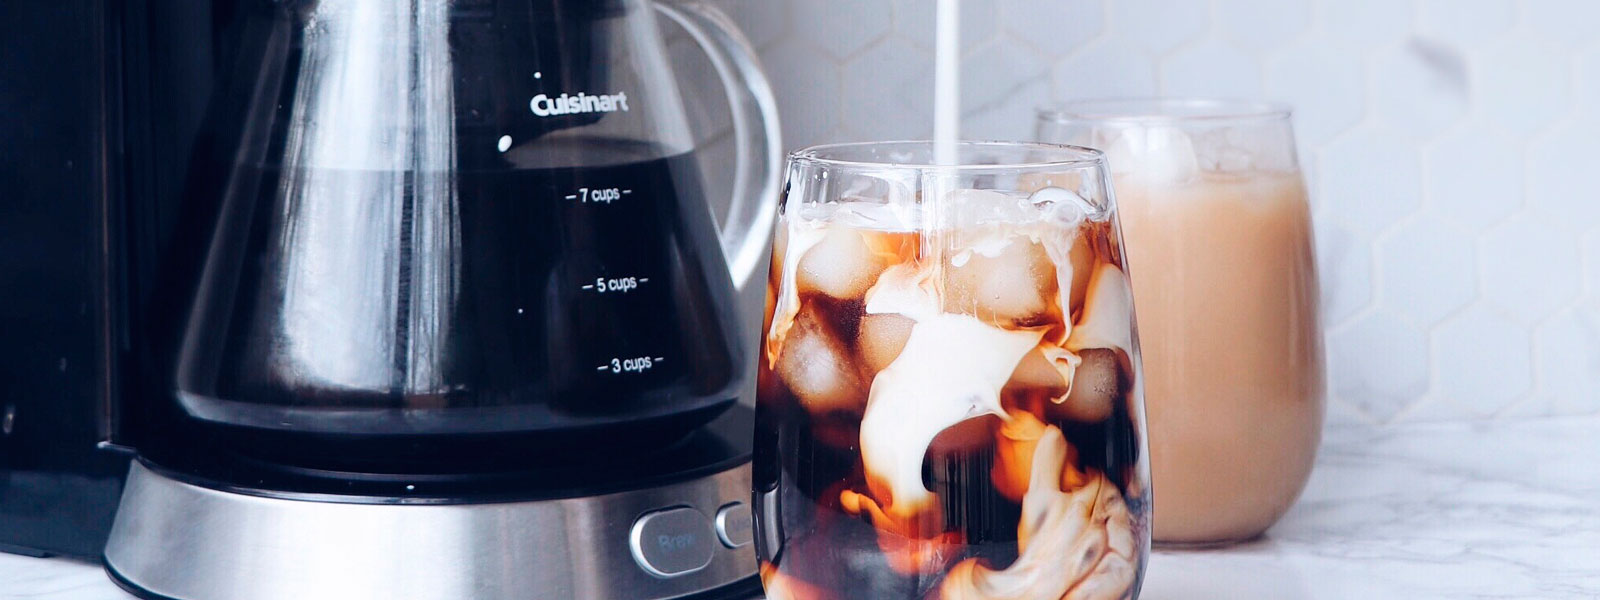 7-Cup Automatic Cold Brew Coffeemaker